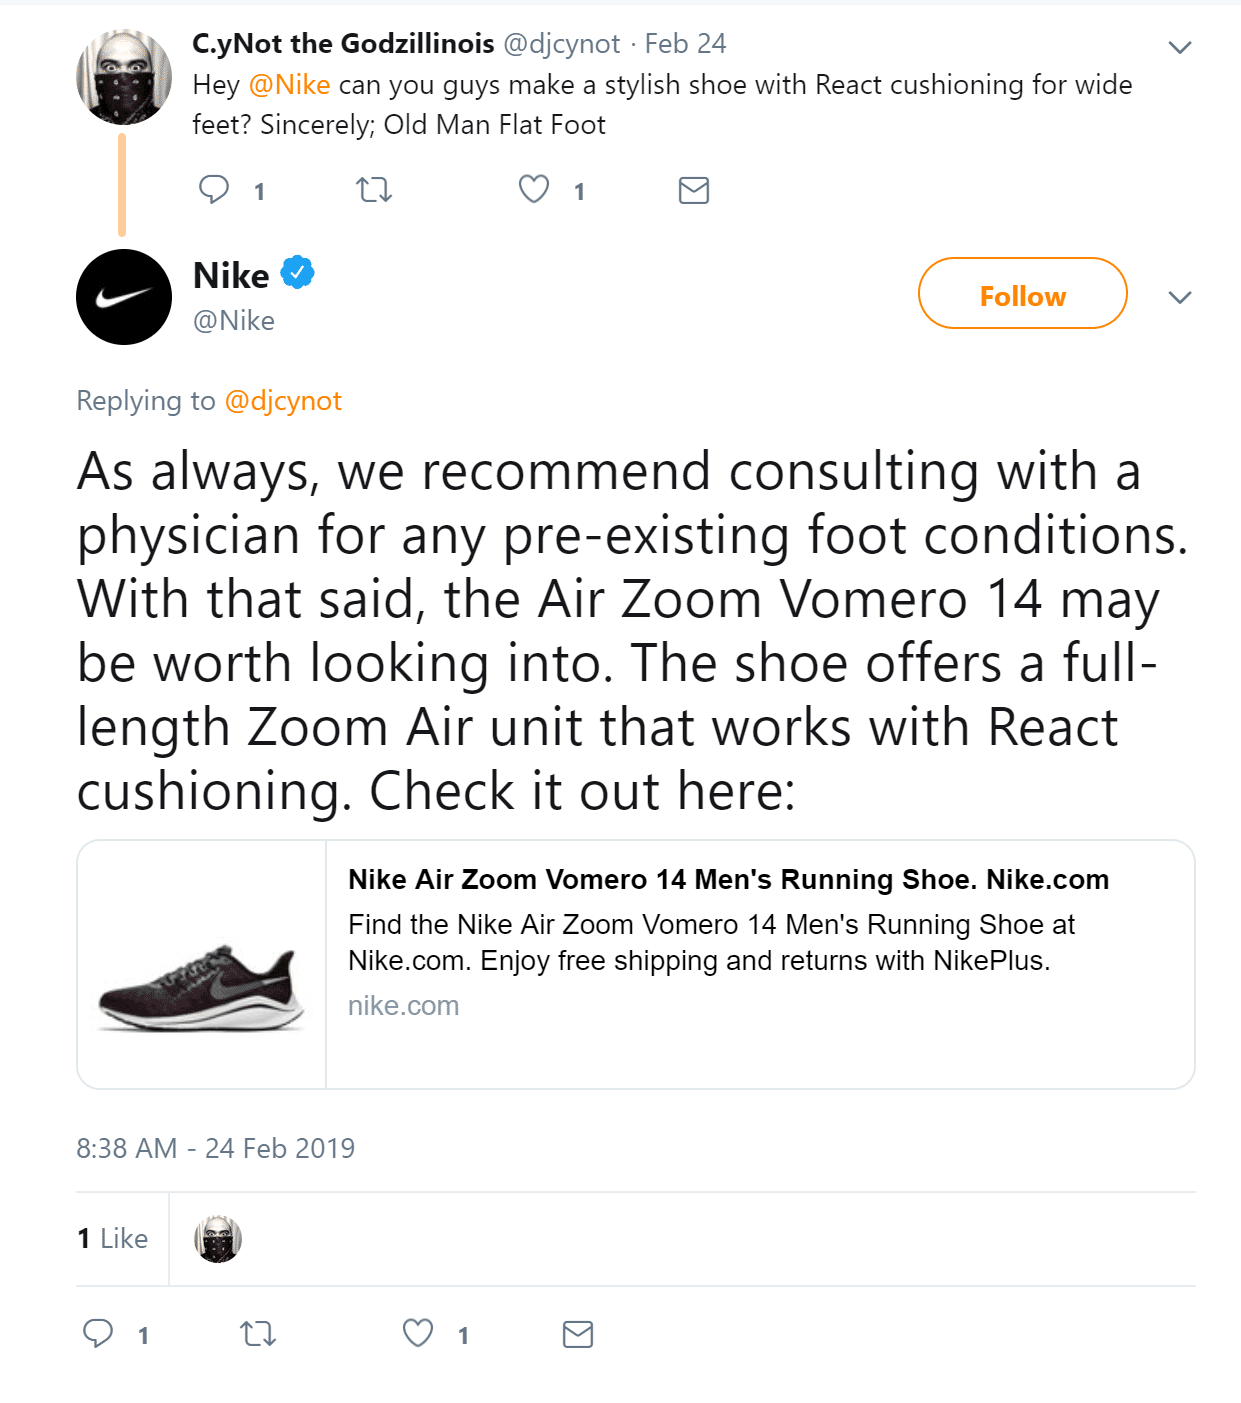 Take Nike for example. When “Old Man Flat Foot” reached out for a recommendation, not only did Nike respond with a possible solution, then went out of their way to protect themselves and the consumer by recommending that they consult with their doctor first.